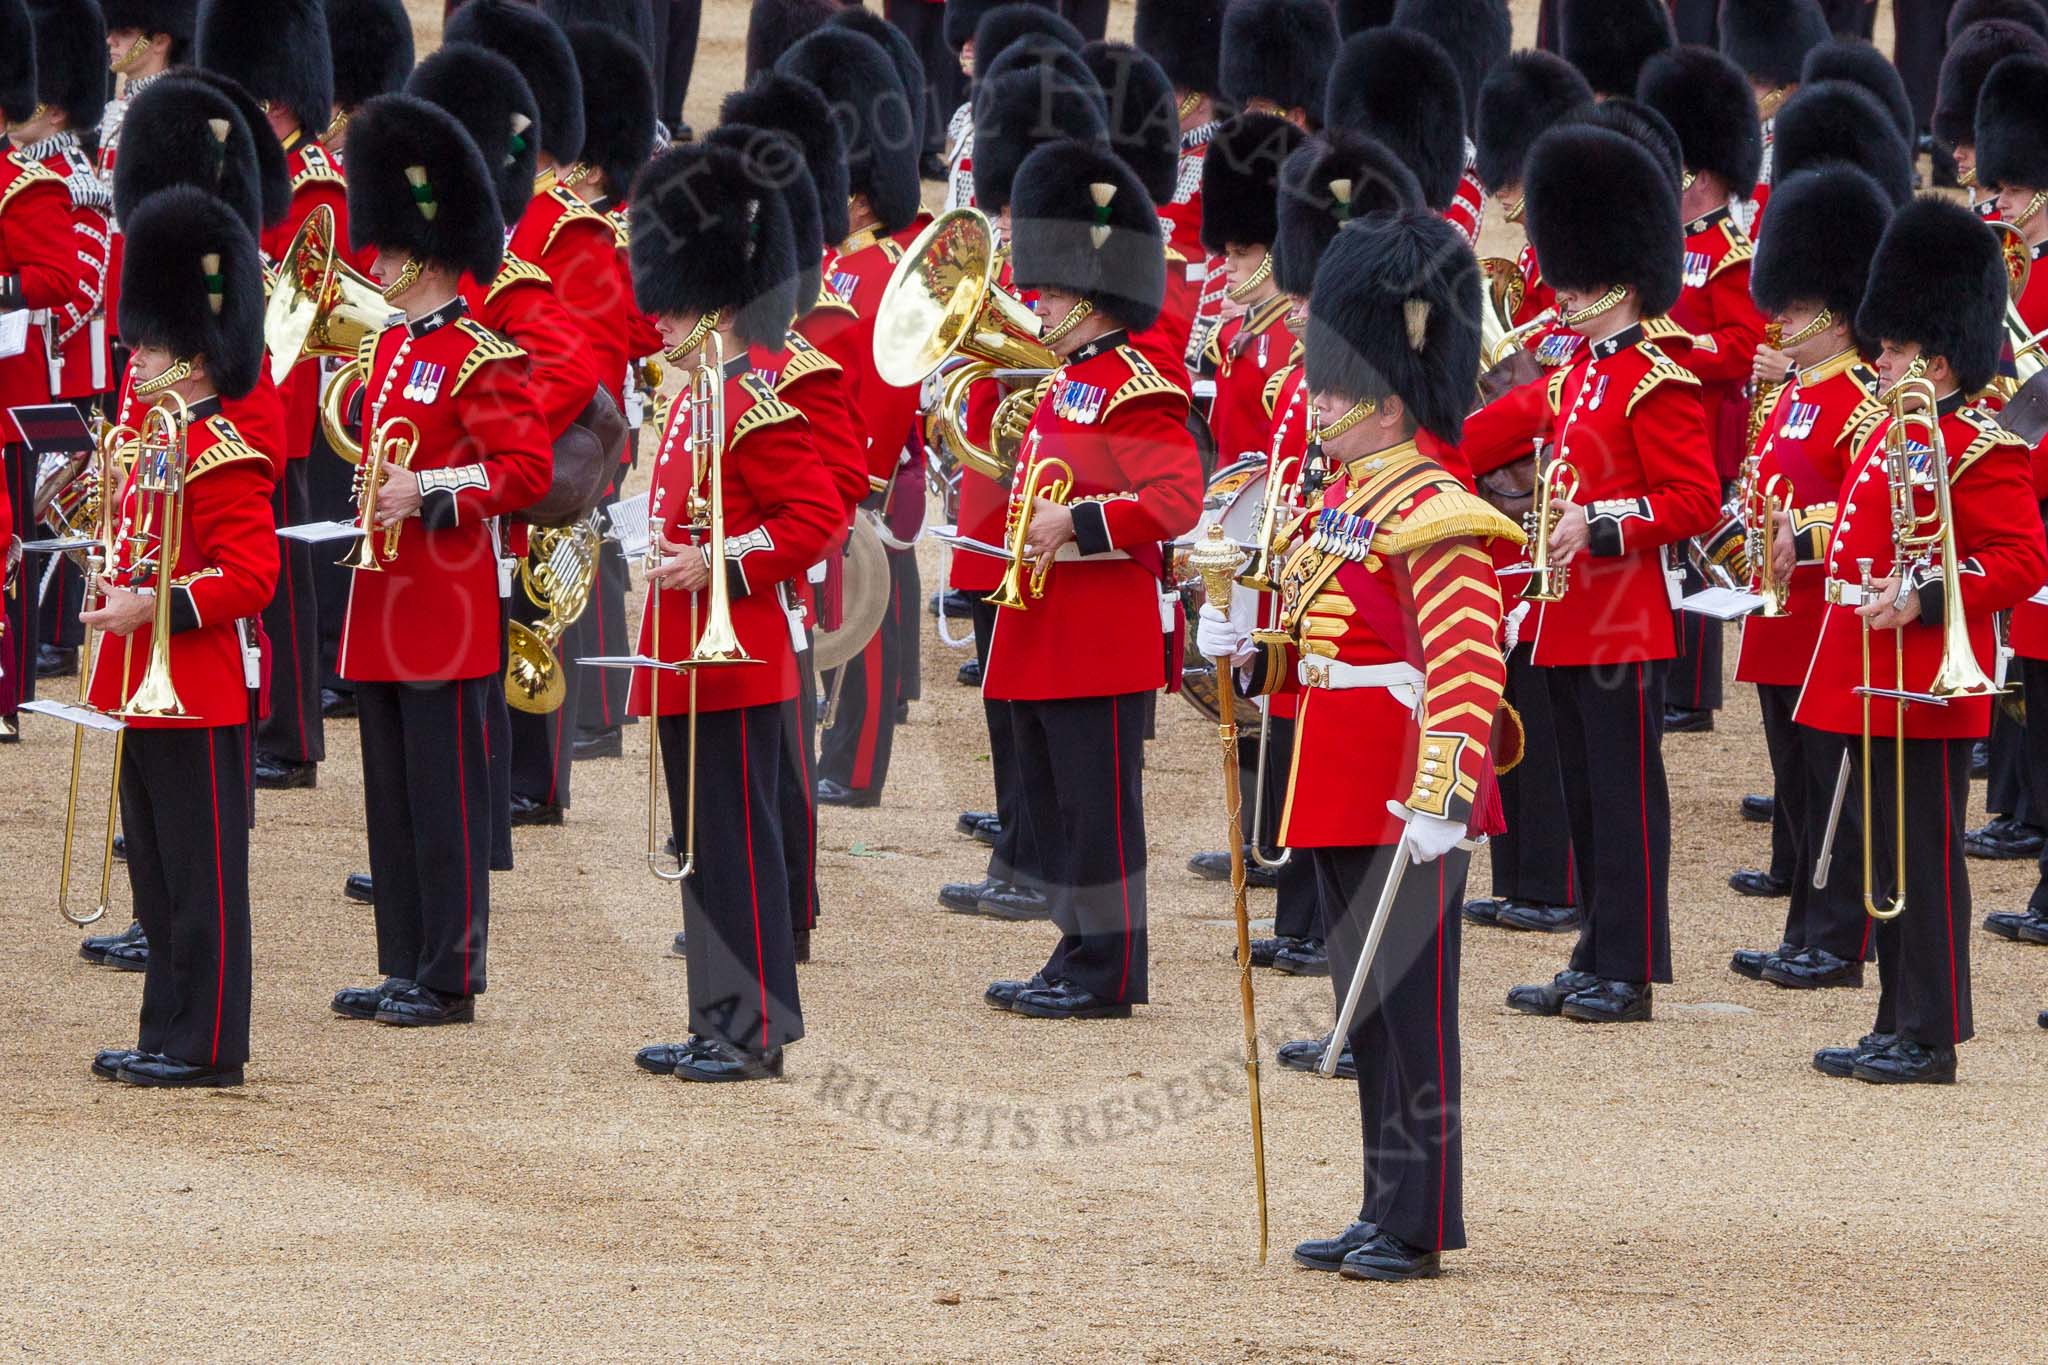 The Colonel's Review 2012: Senior Drum Major, M Betts, Grenadier Guards, with the Band of the Welsh Guards...
Horse Guards Parade, Westminster,
London SW1,

United Kingdom,
on 09 June 2012 at 11:48, image #367